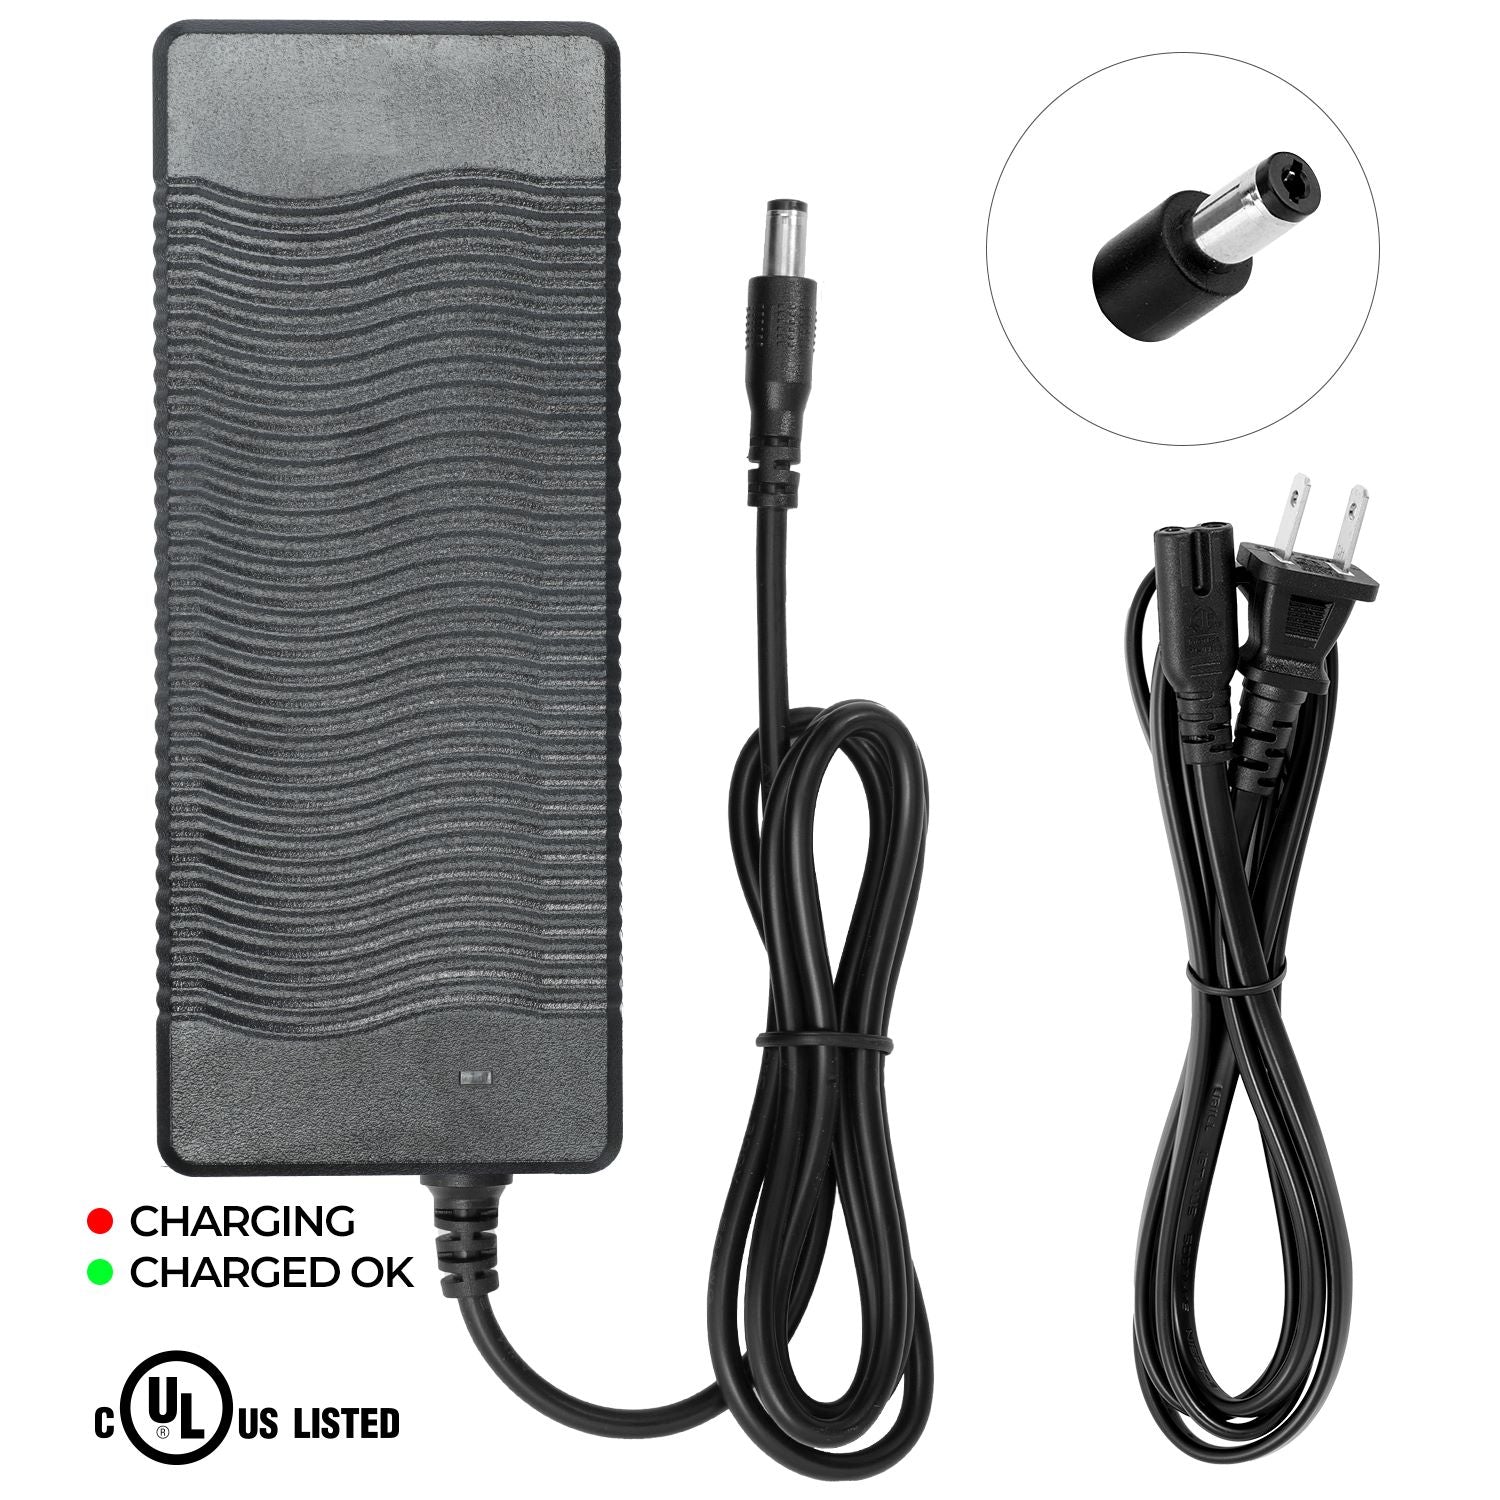 Charger for Go Power Go Express Electric Bike